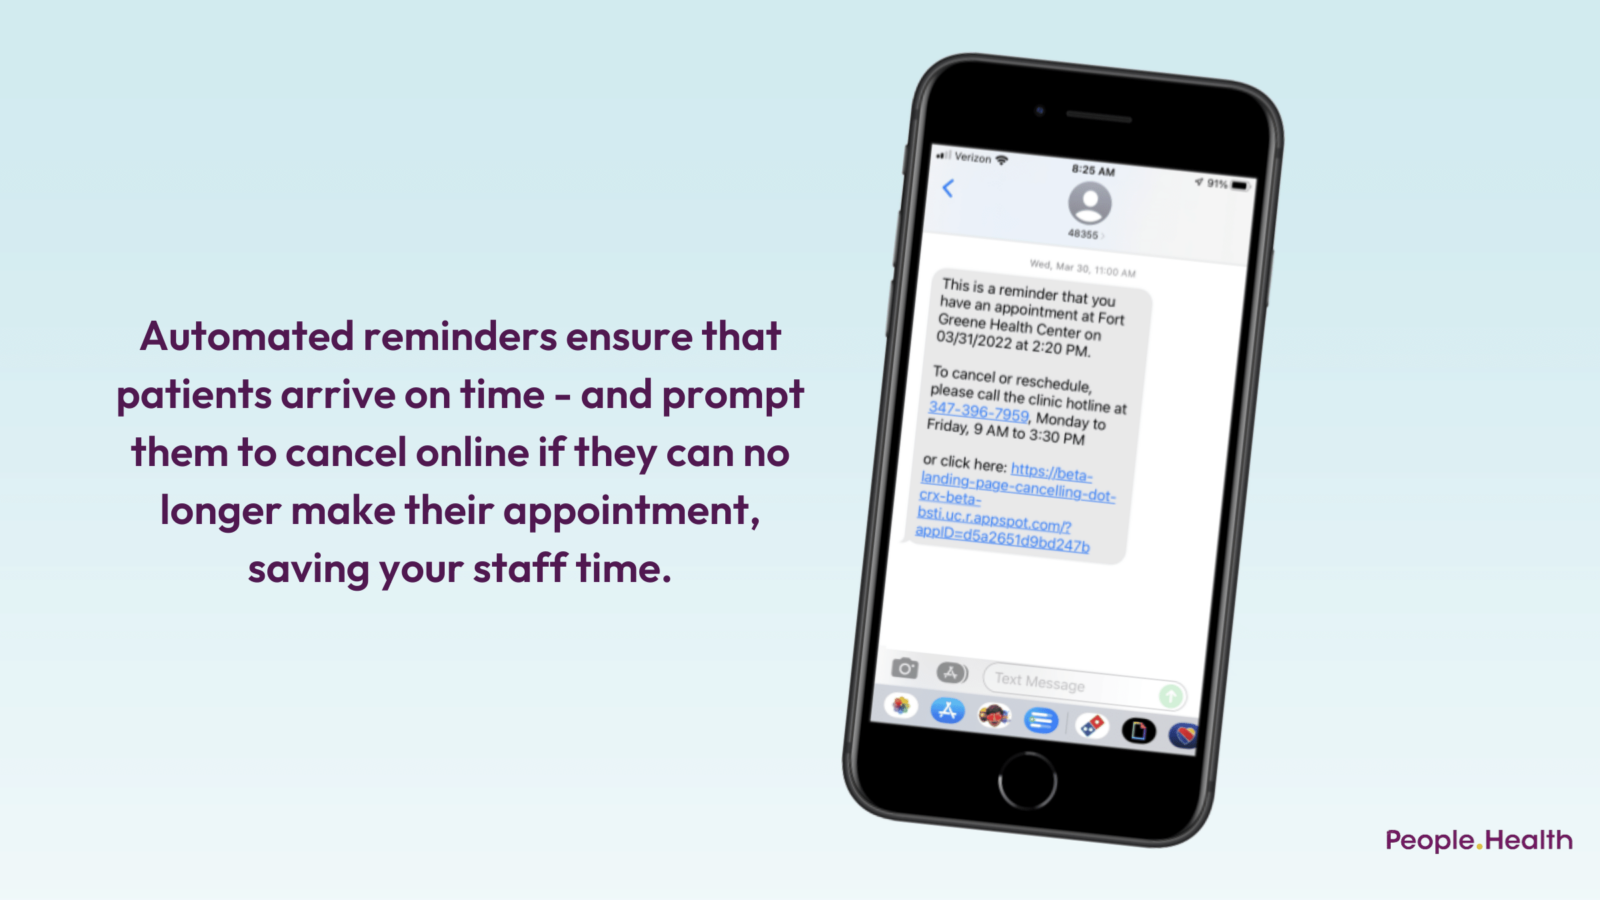 Automated reminders ensure patients arrive on time--and prompt them to cancel if they can't make their appointment, saving your staff time.